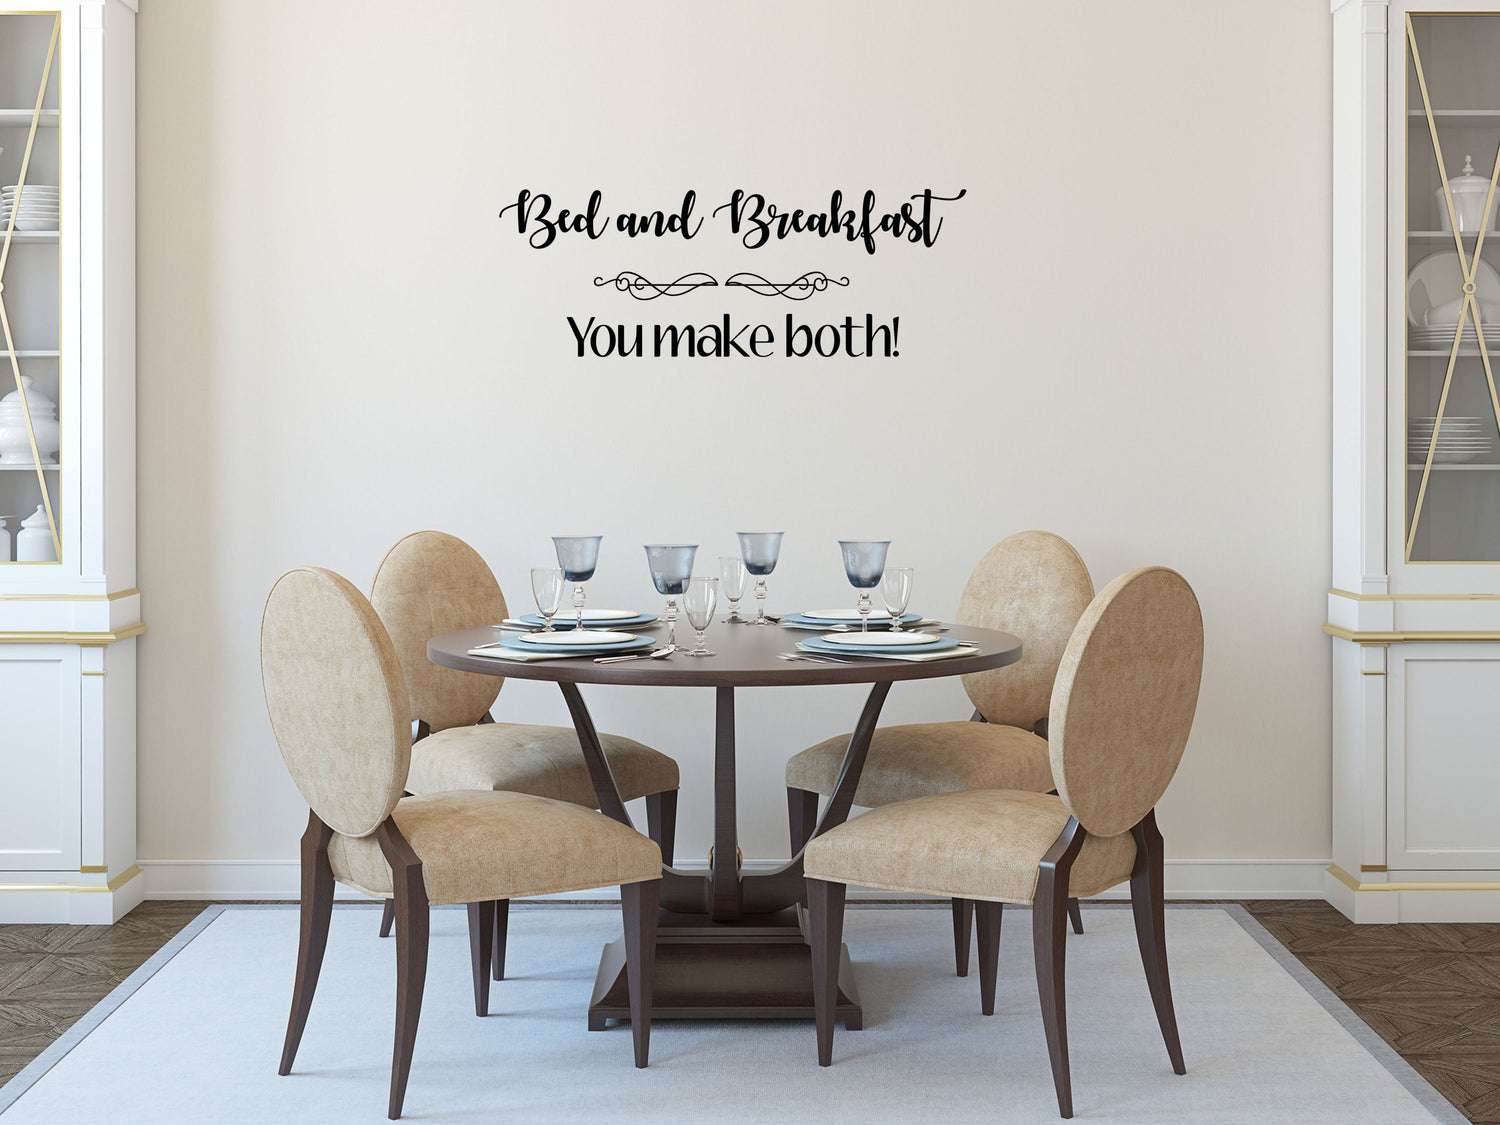 Bed & Breakfast You Make Both Vinyl For Wall- Inspirational Wall Decals Vinyl Wall Decal Inspirational Wall Signs 